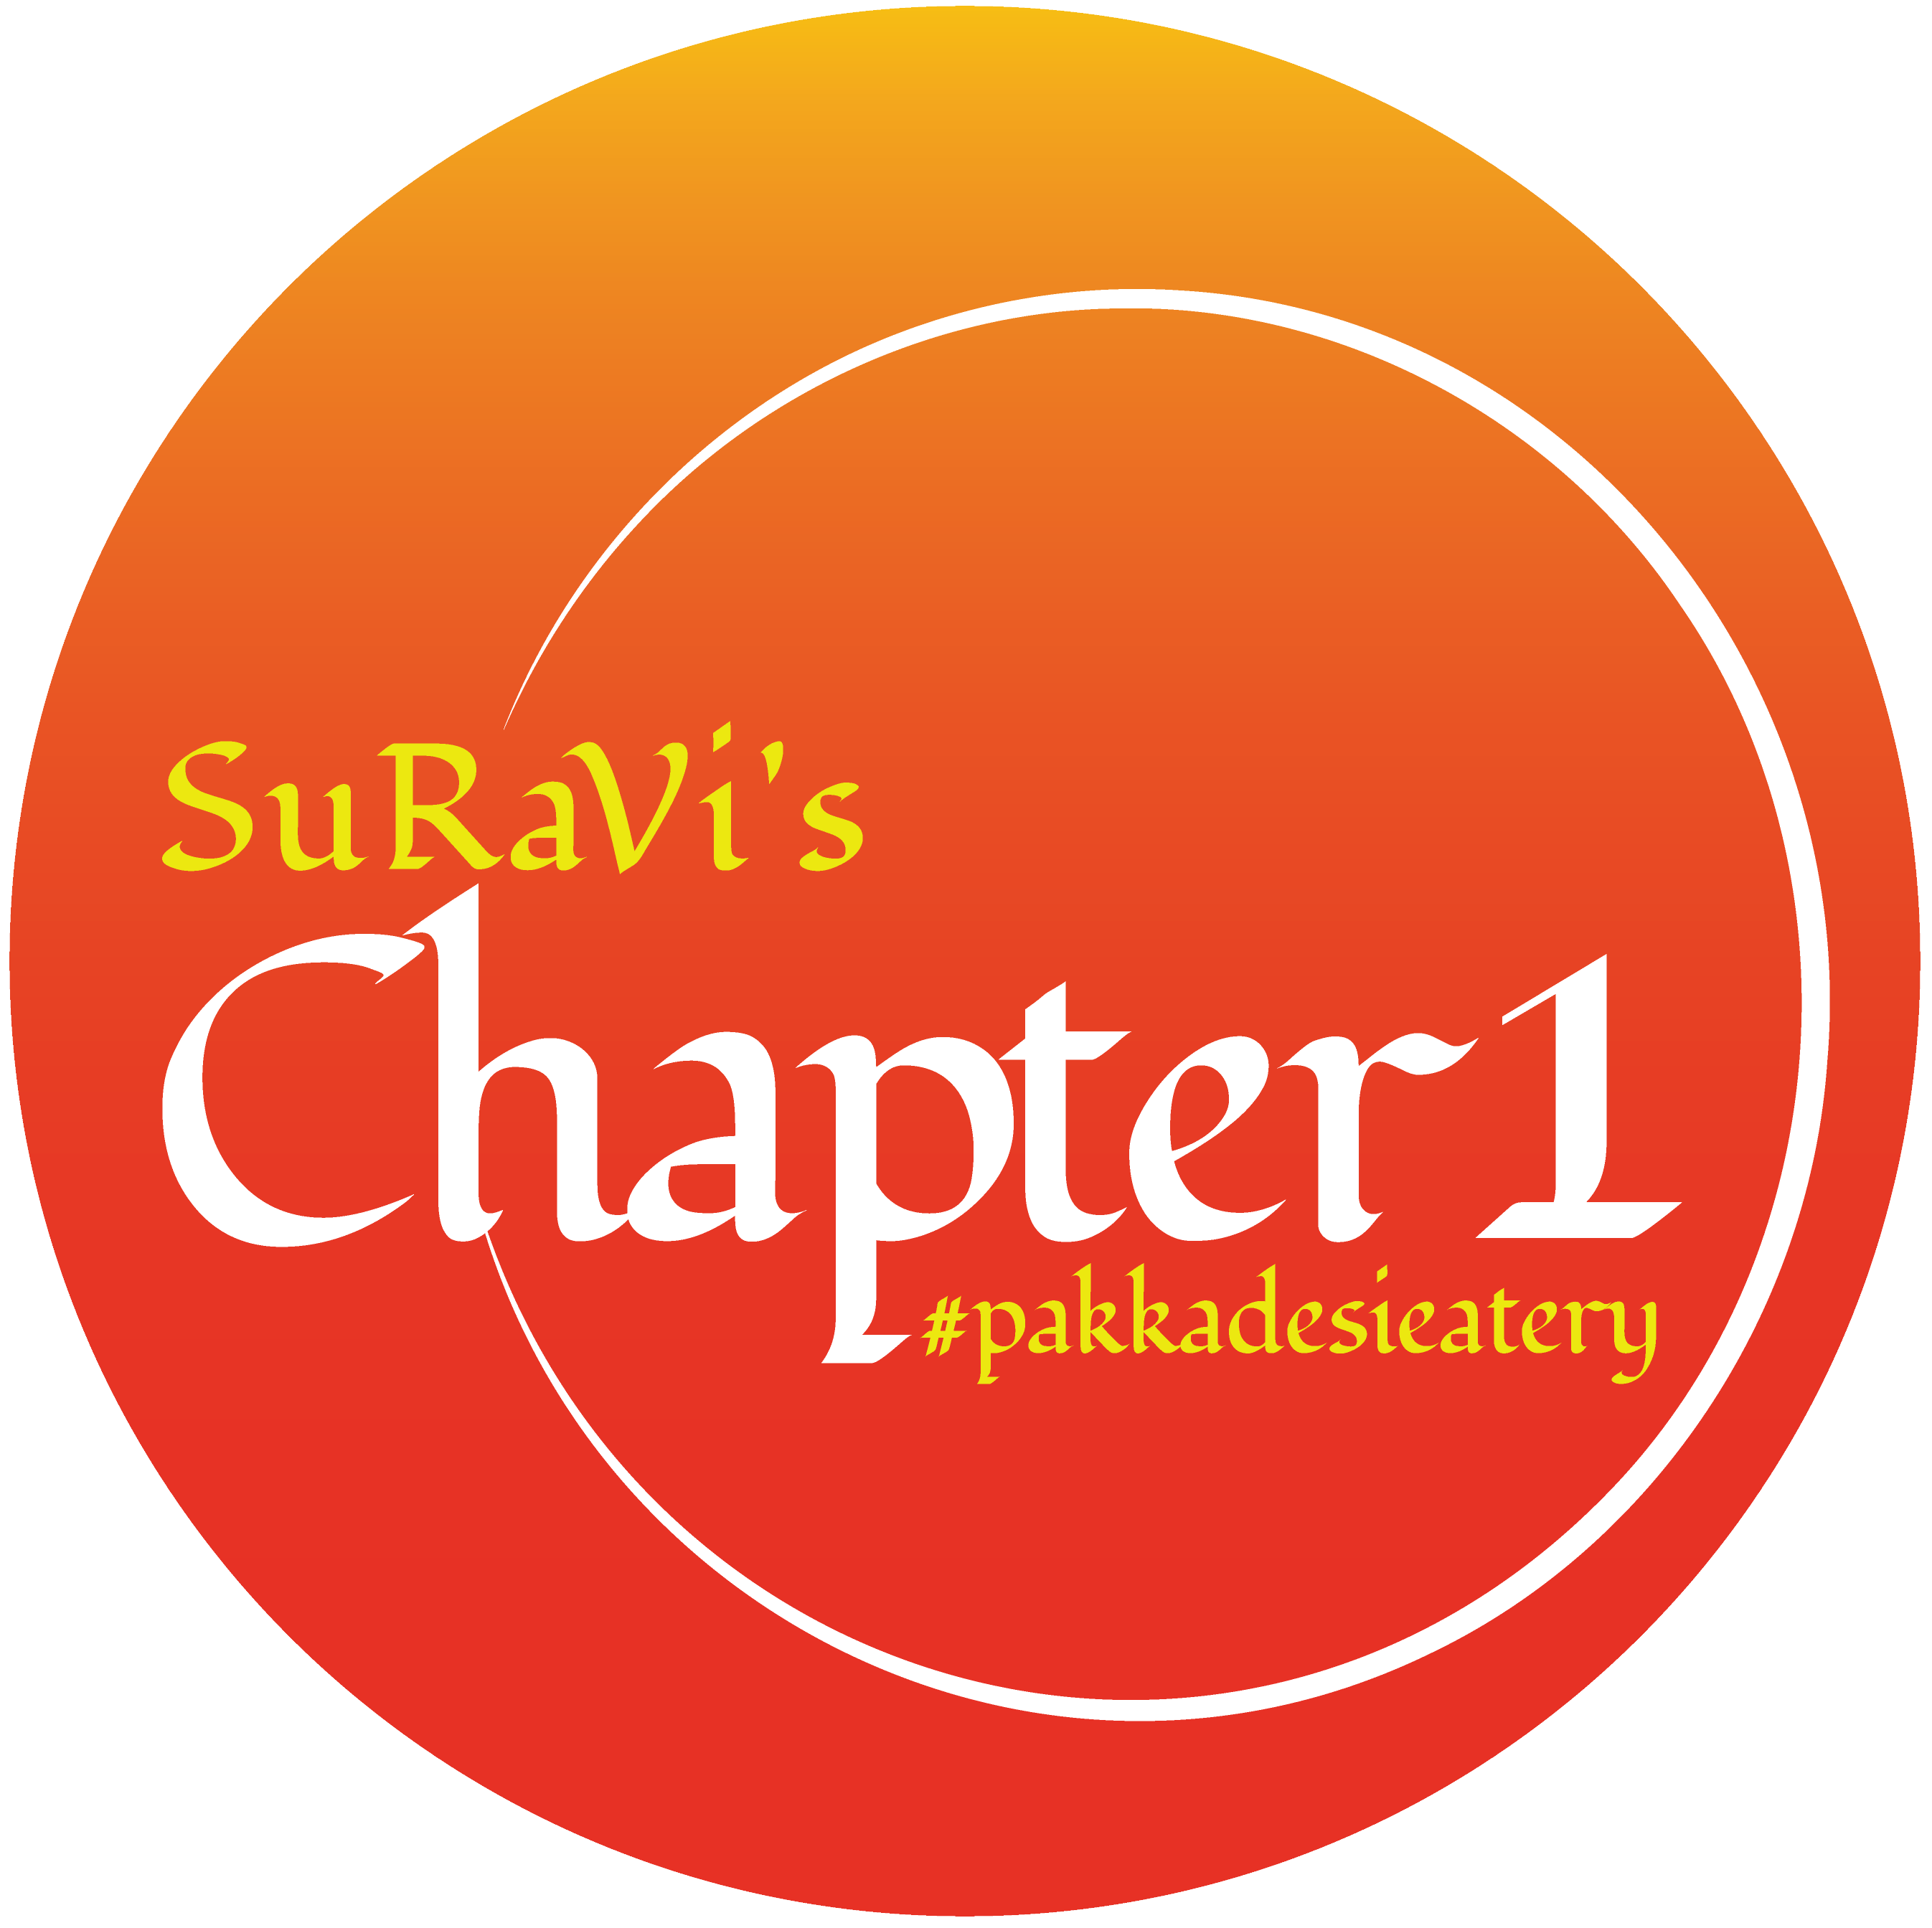 Suravi's Chapter 1